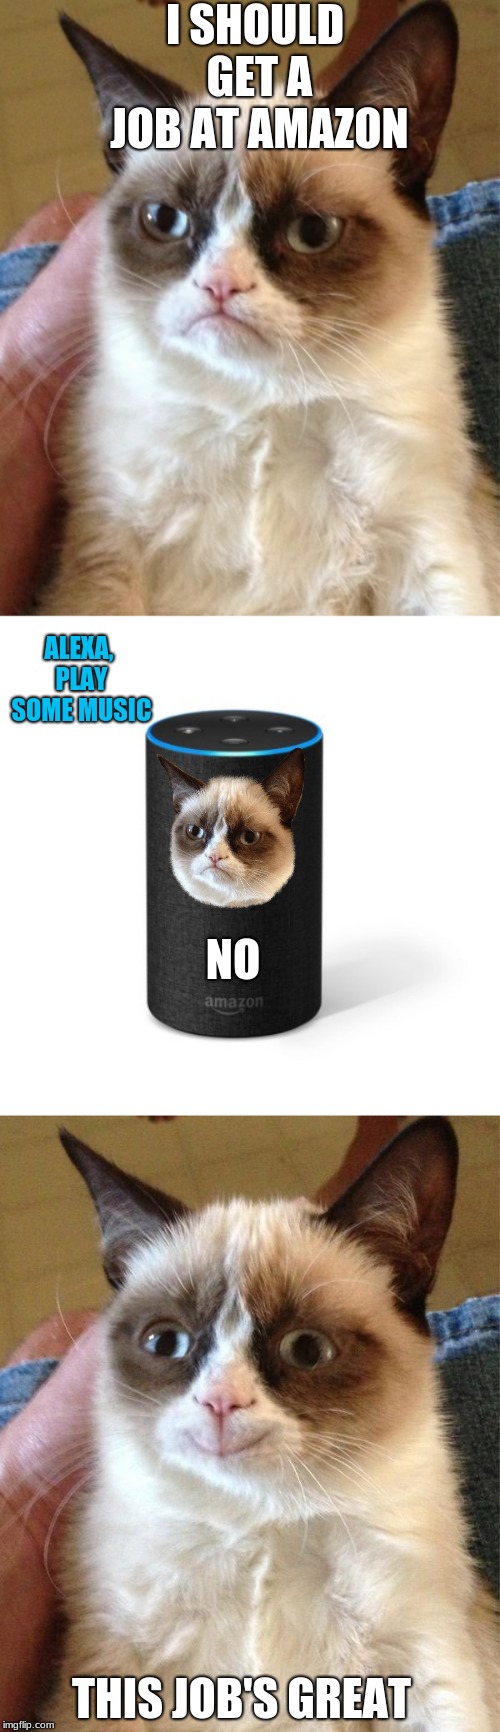 They have so much in common. | I SHOULD GET A JOB AT AMAZON; ALEXA, PLAY SOME MUSIC; NO; THIS JOB'S GREAT | image tagged in memes,grumpy cat,alexa,funny,cats,amazon echo | made w/ Imgflip meme maker